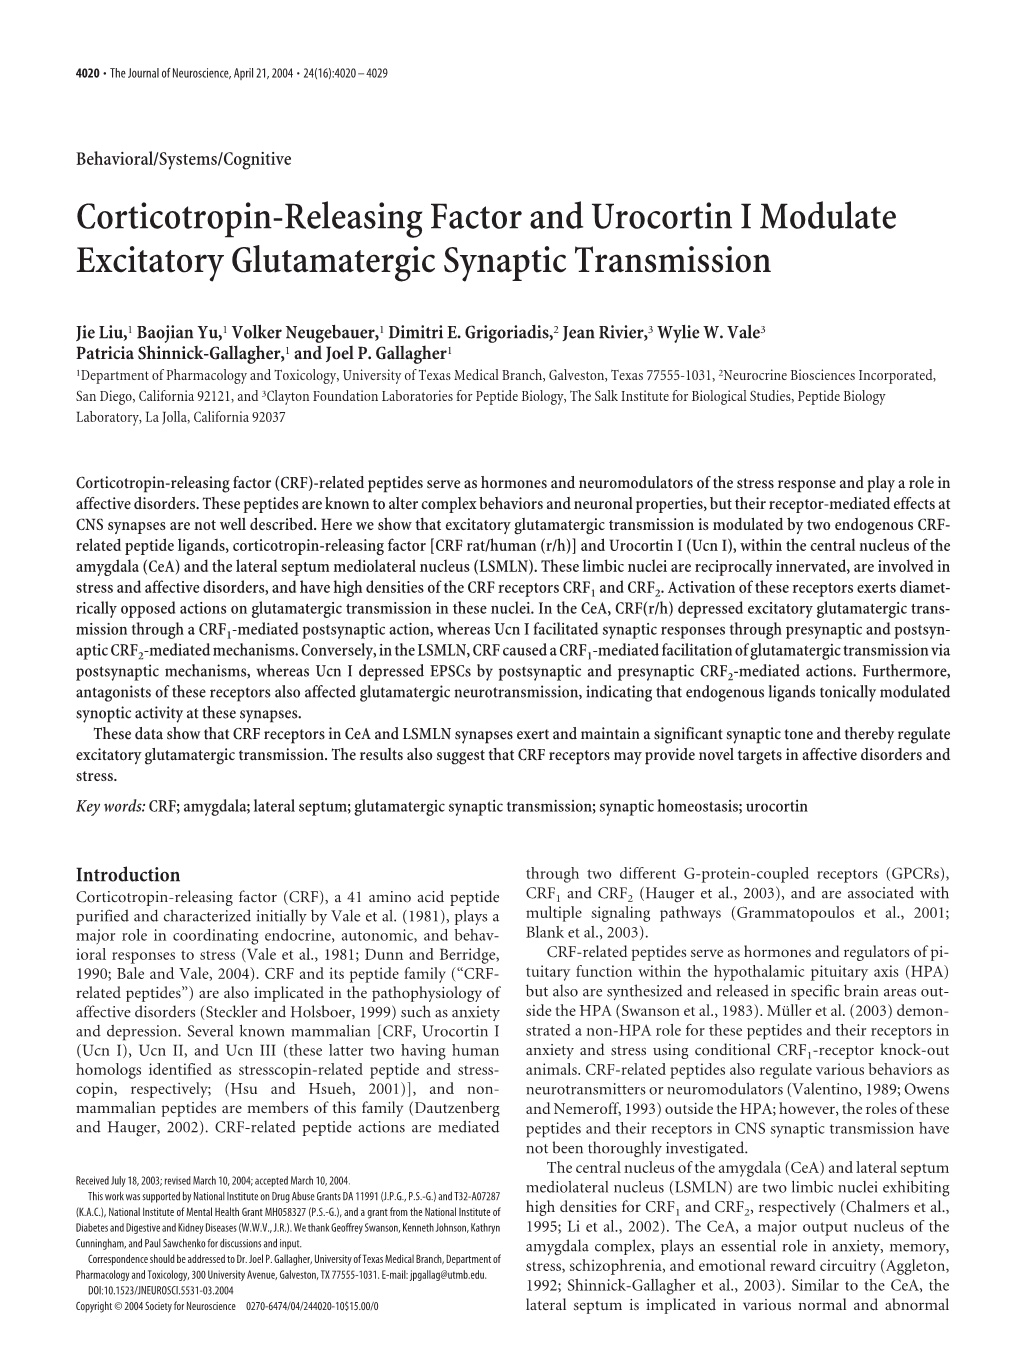 Corticotropin-Releasing Factor and Urocortin I Modulate Excitatory Glutamatergic Synaptic Transmission